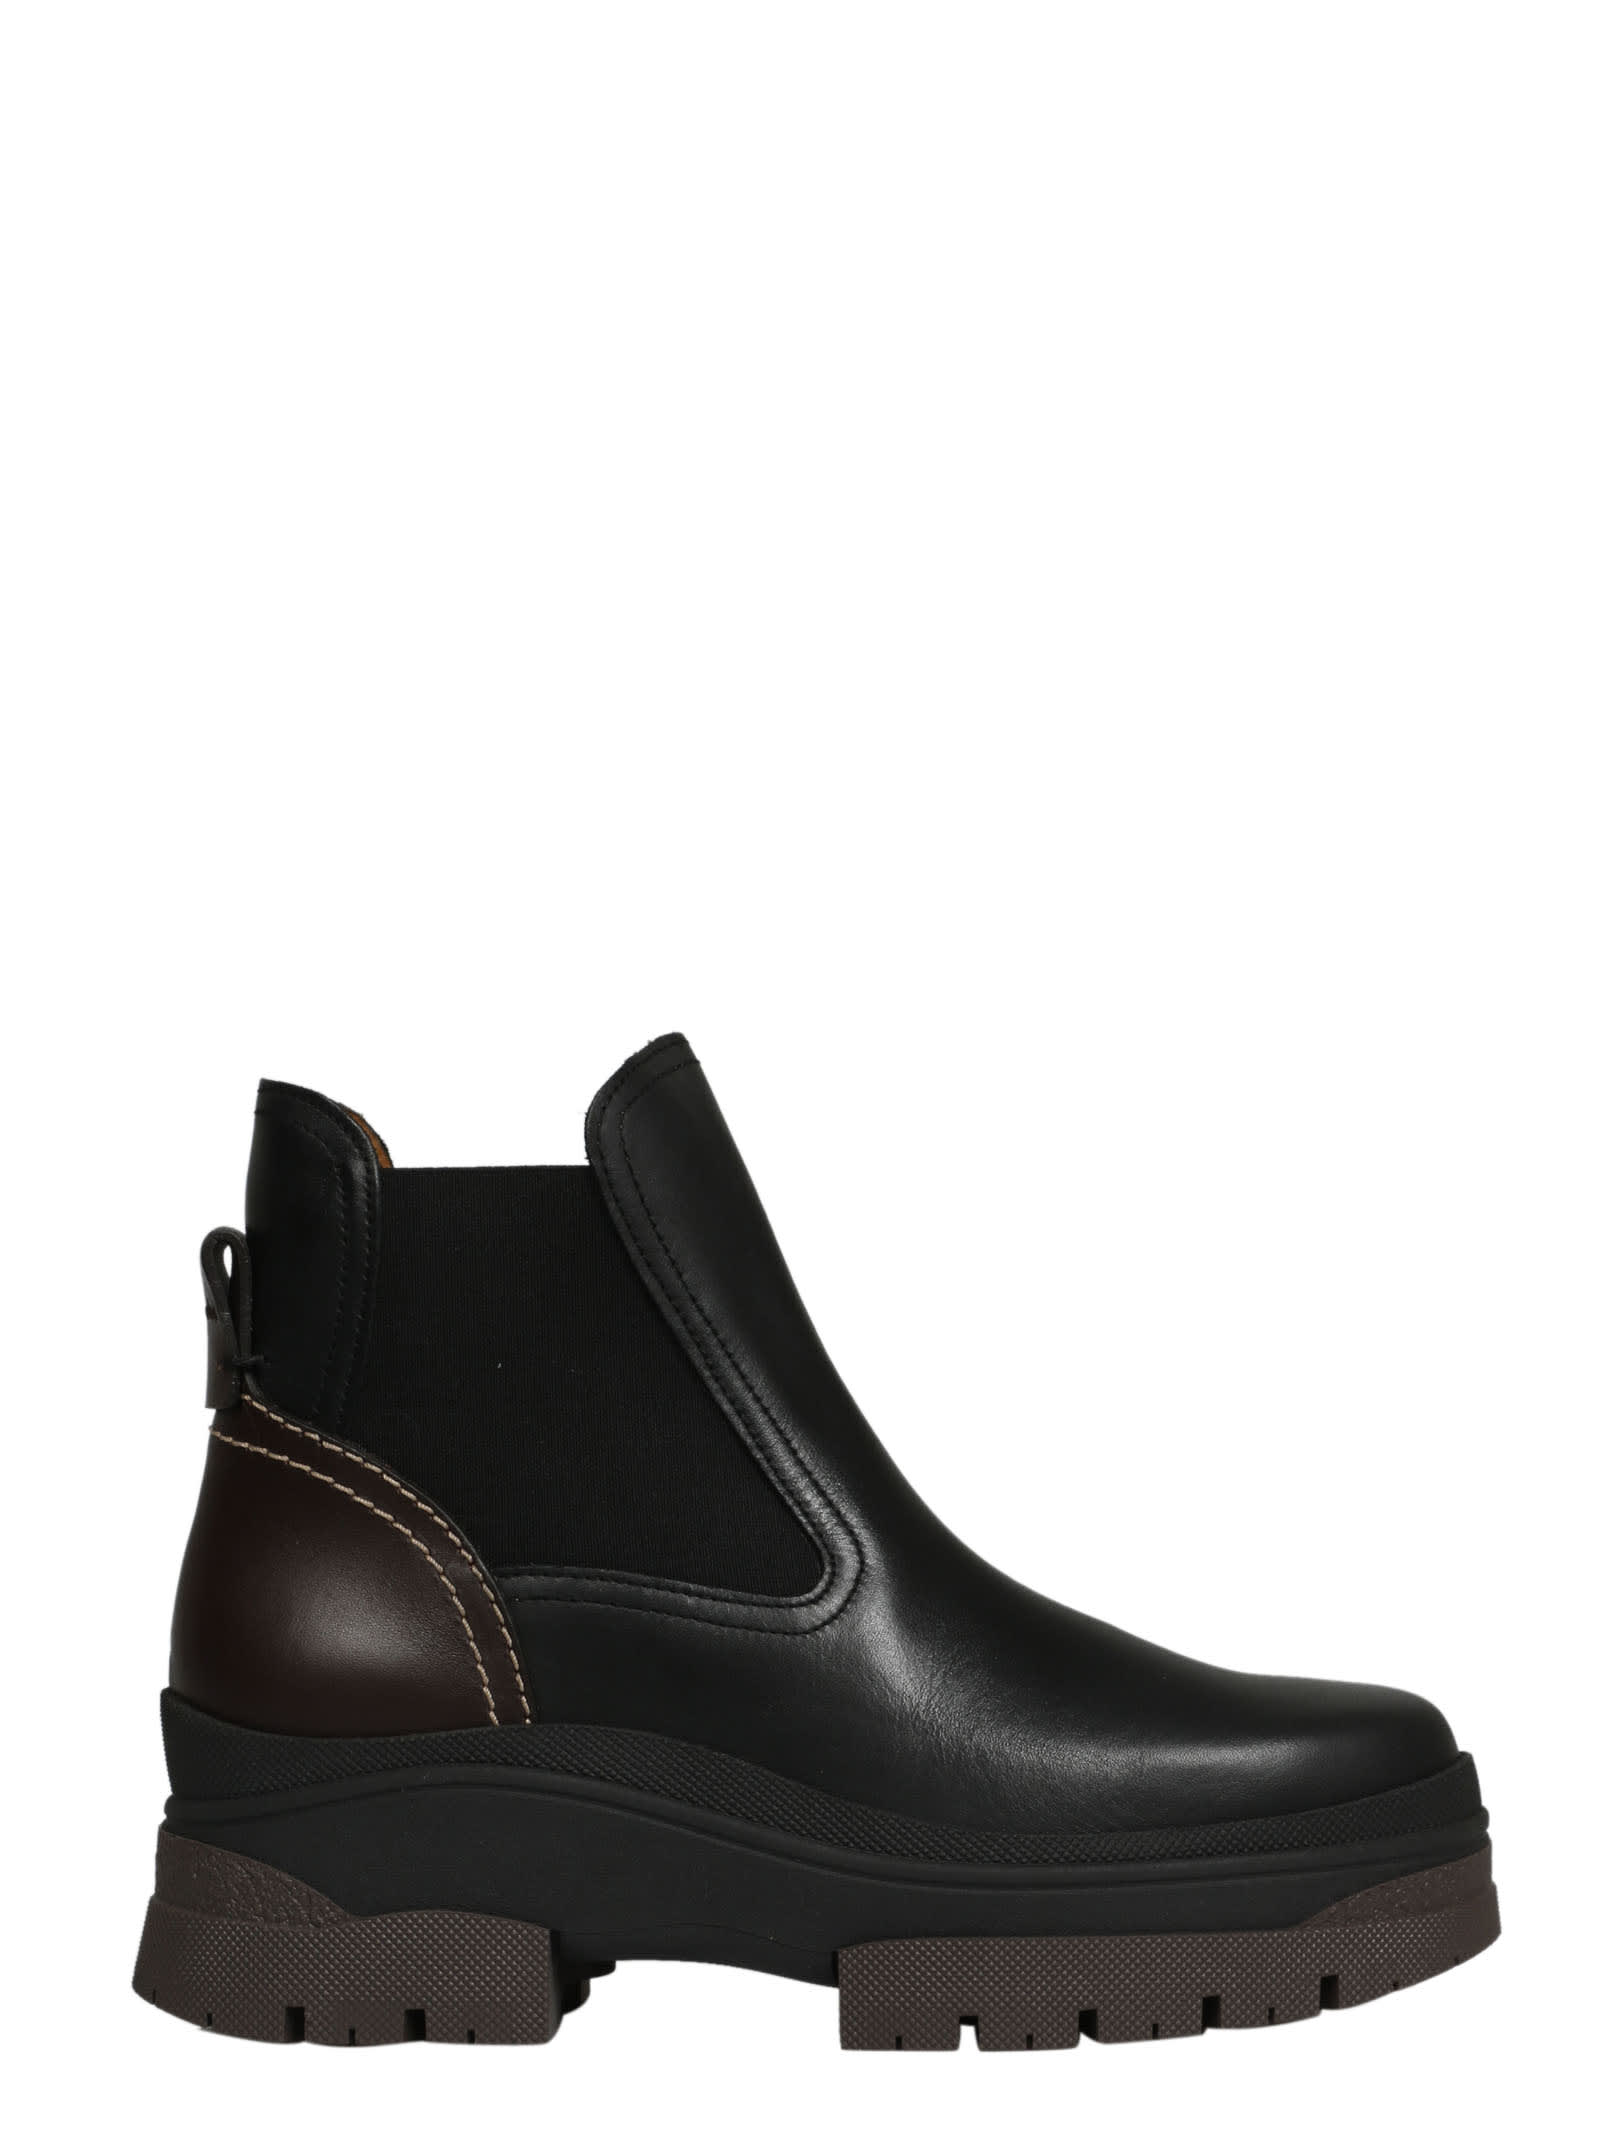 See by Chloé Chelsea Cassidie Boots